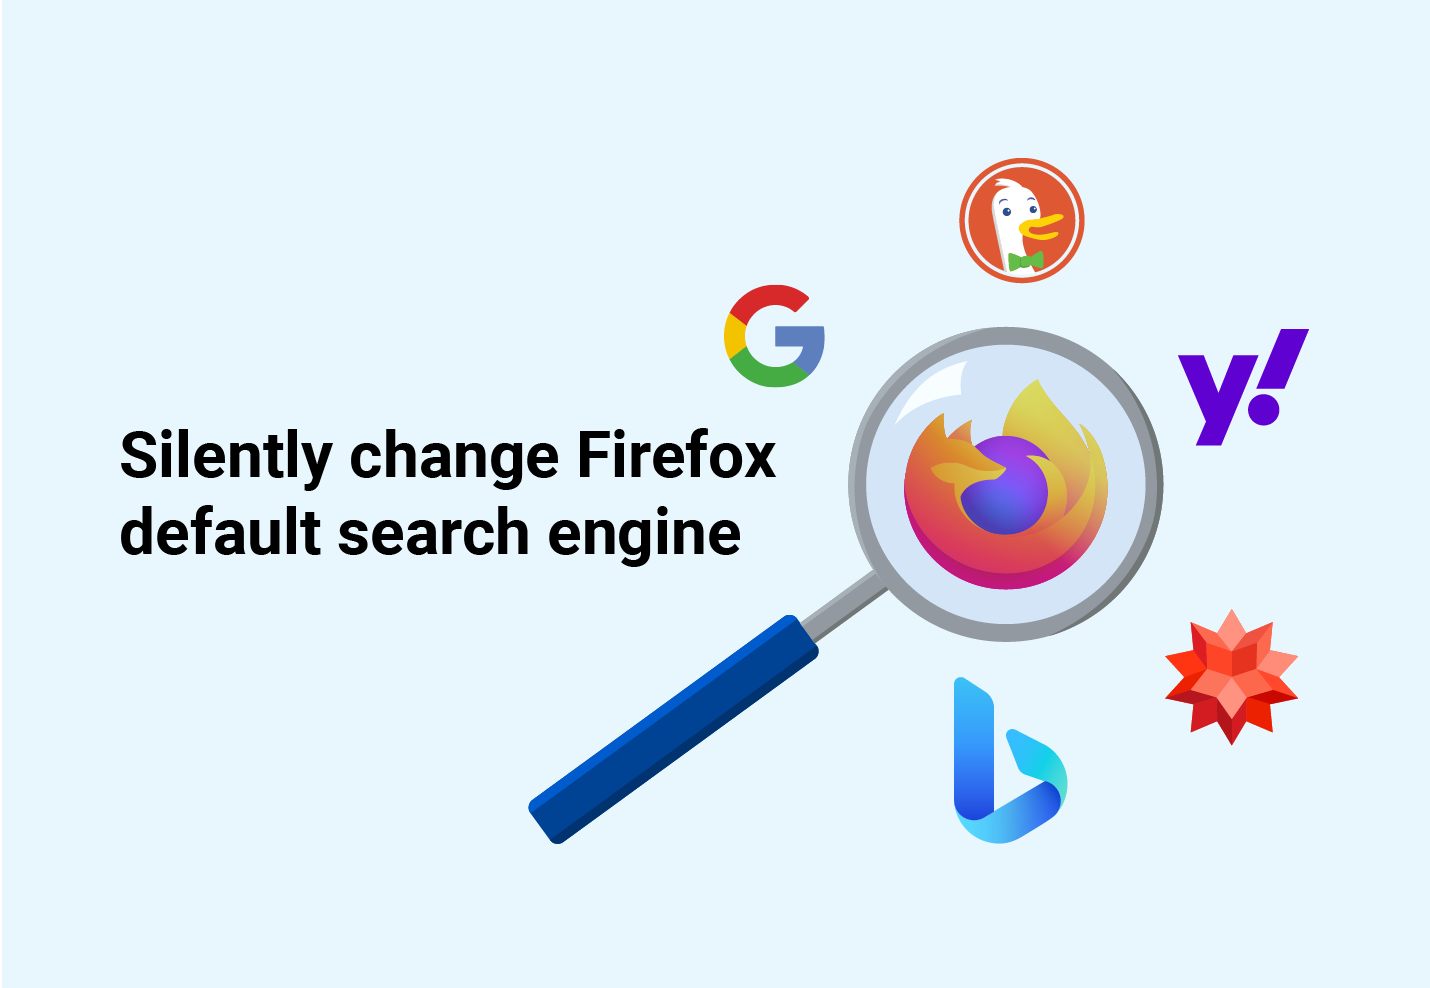 Silently change Firefox default search engine Image